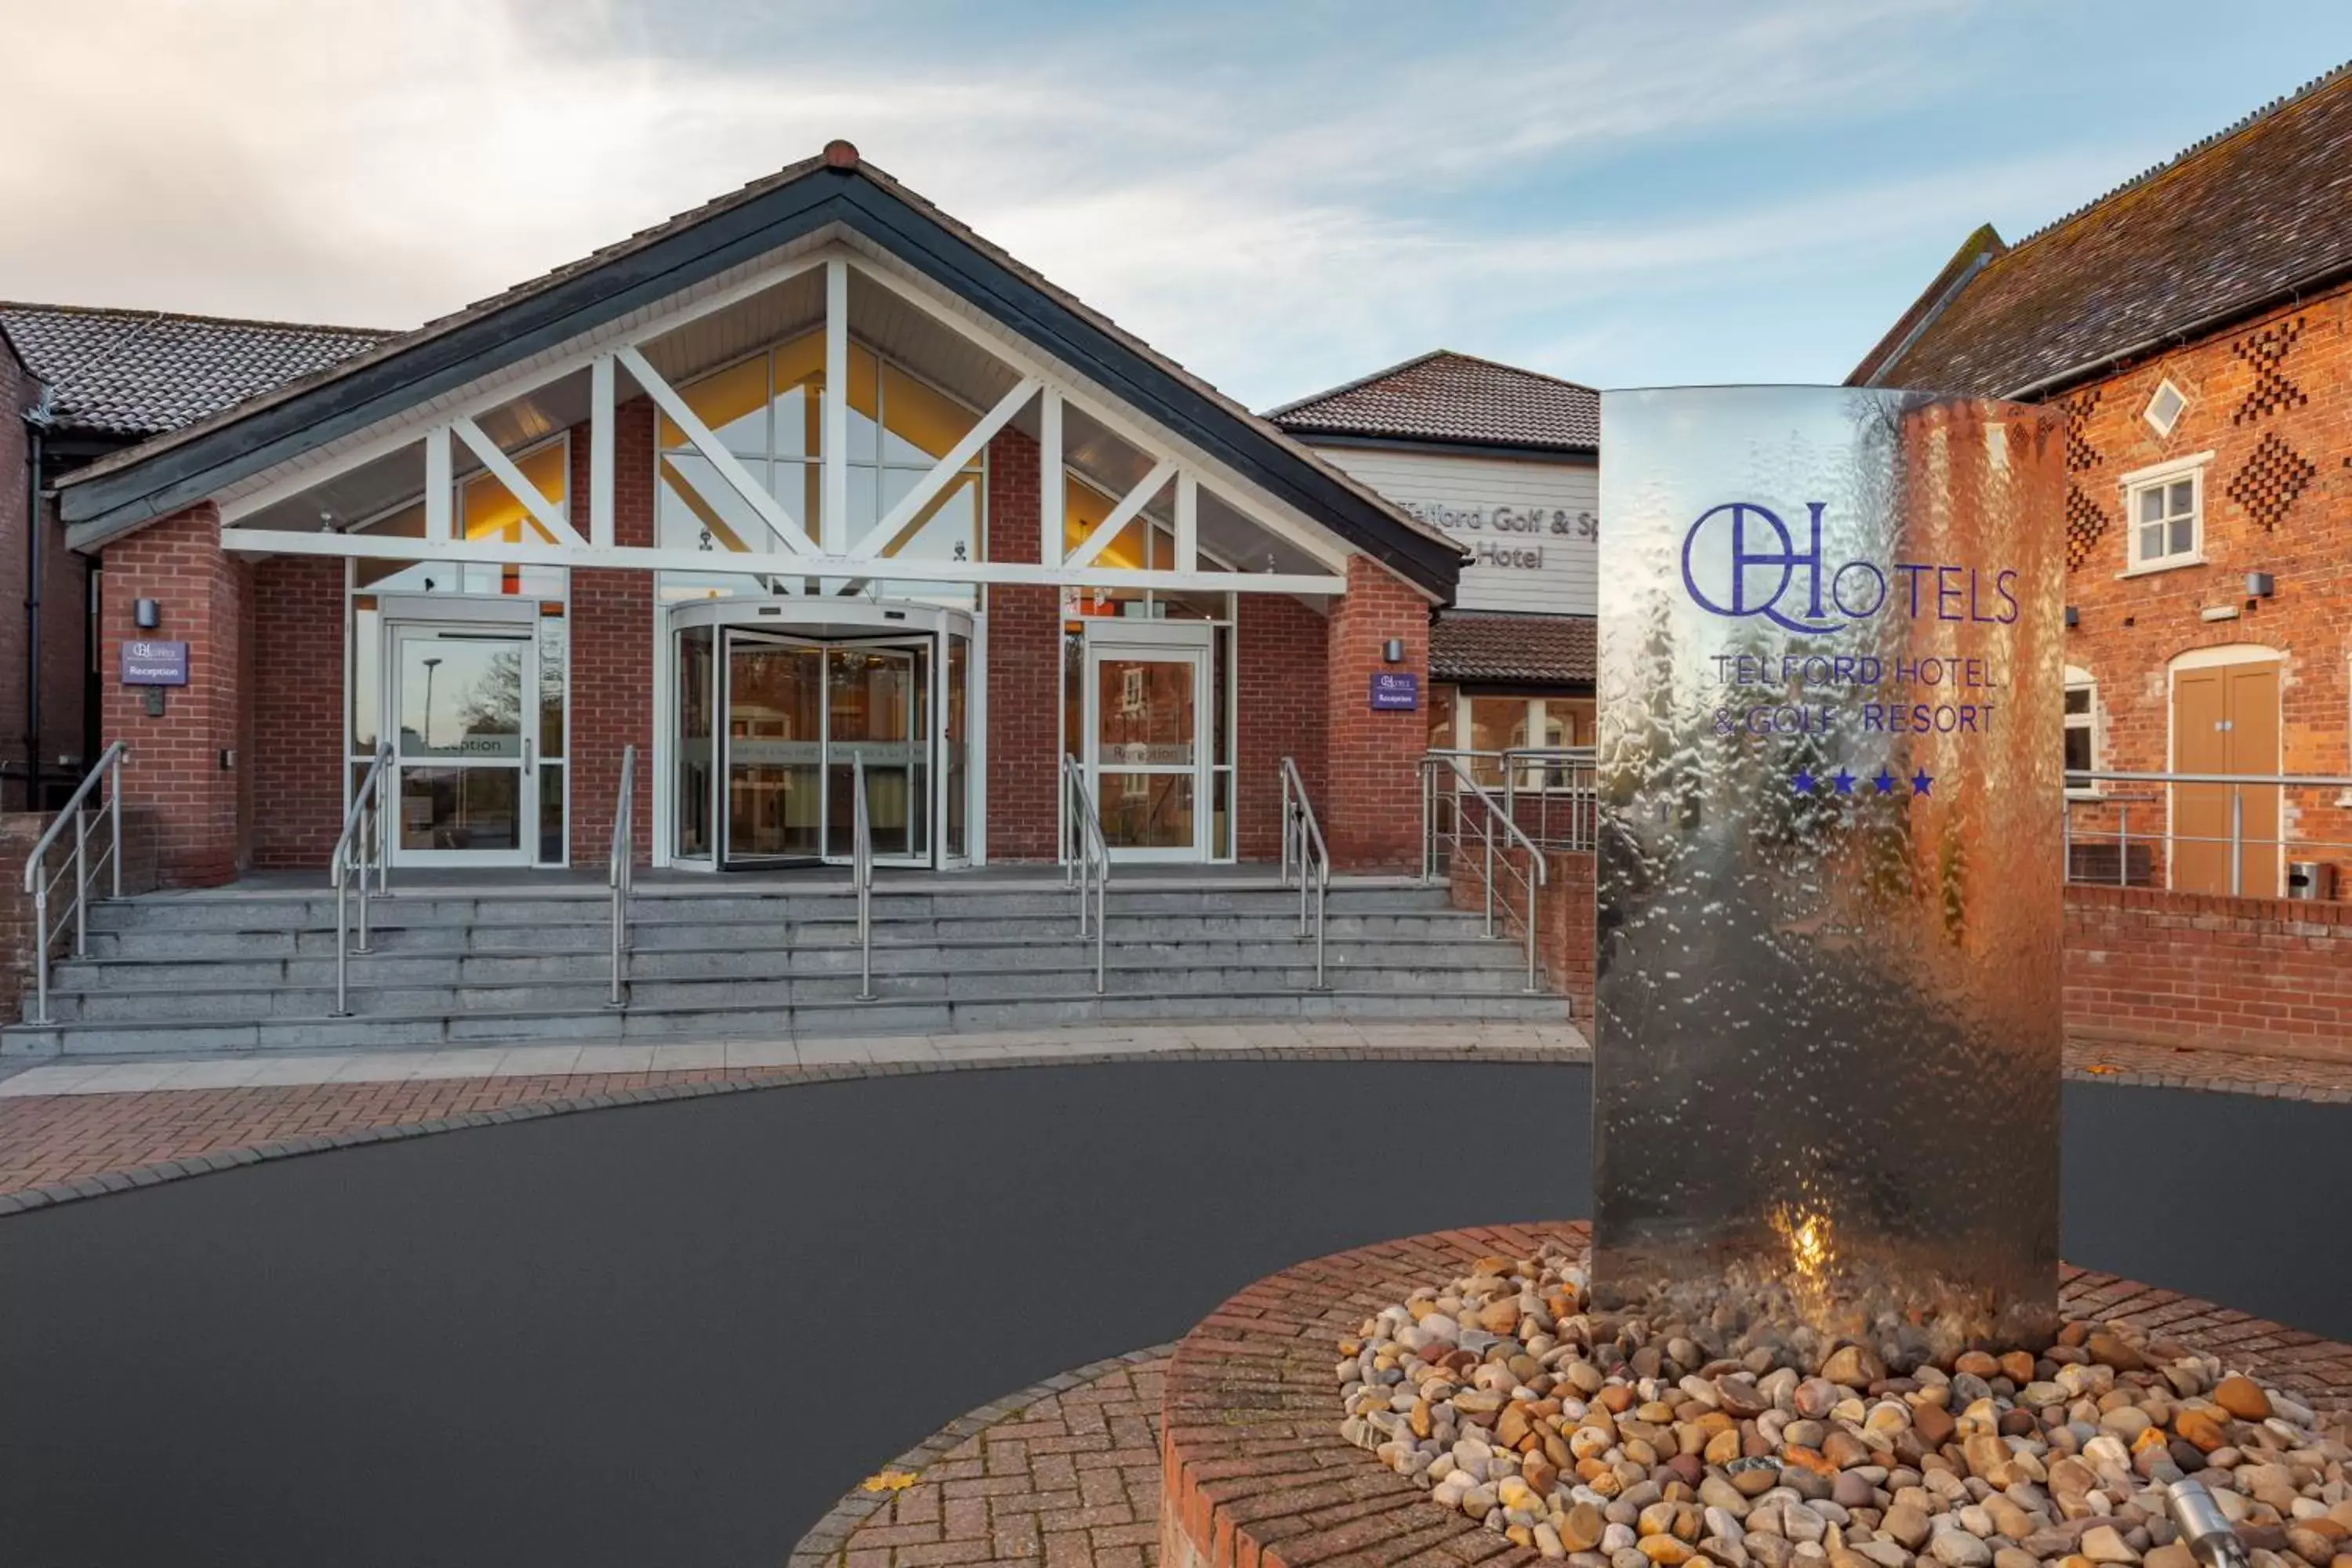 Property building in The Telford Hotel, Spa & Golf Resort